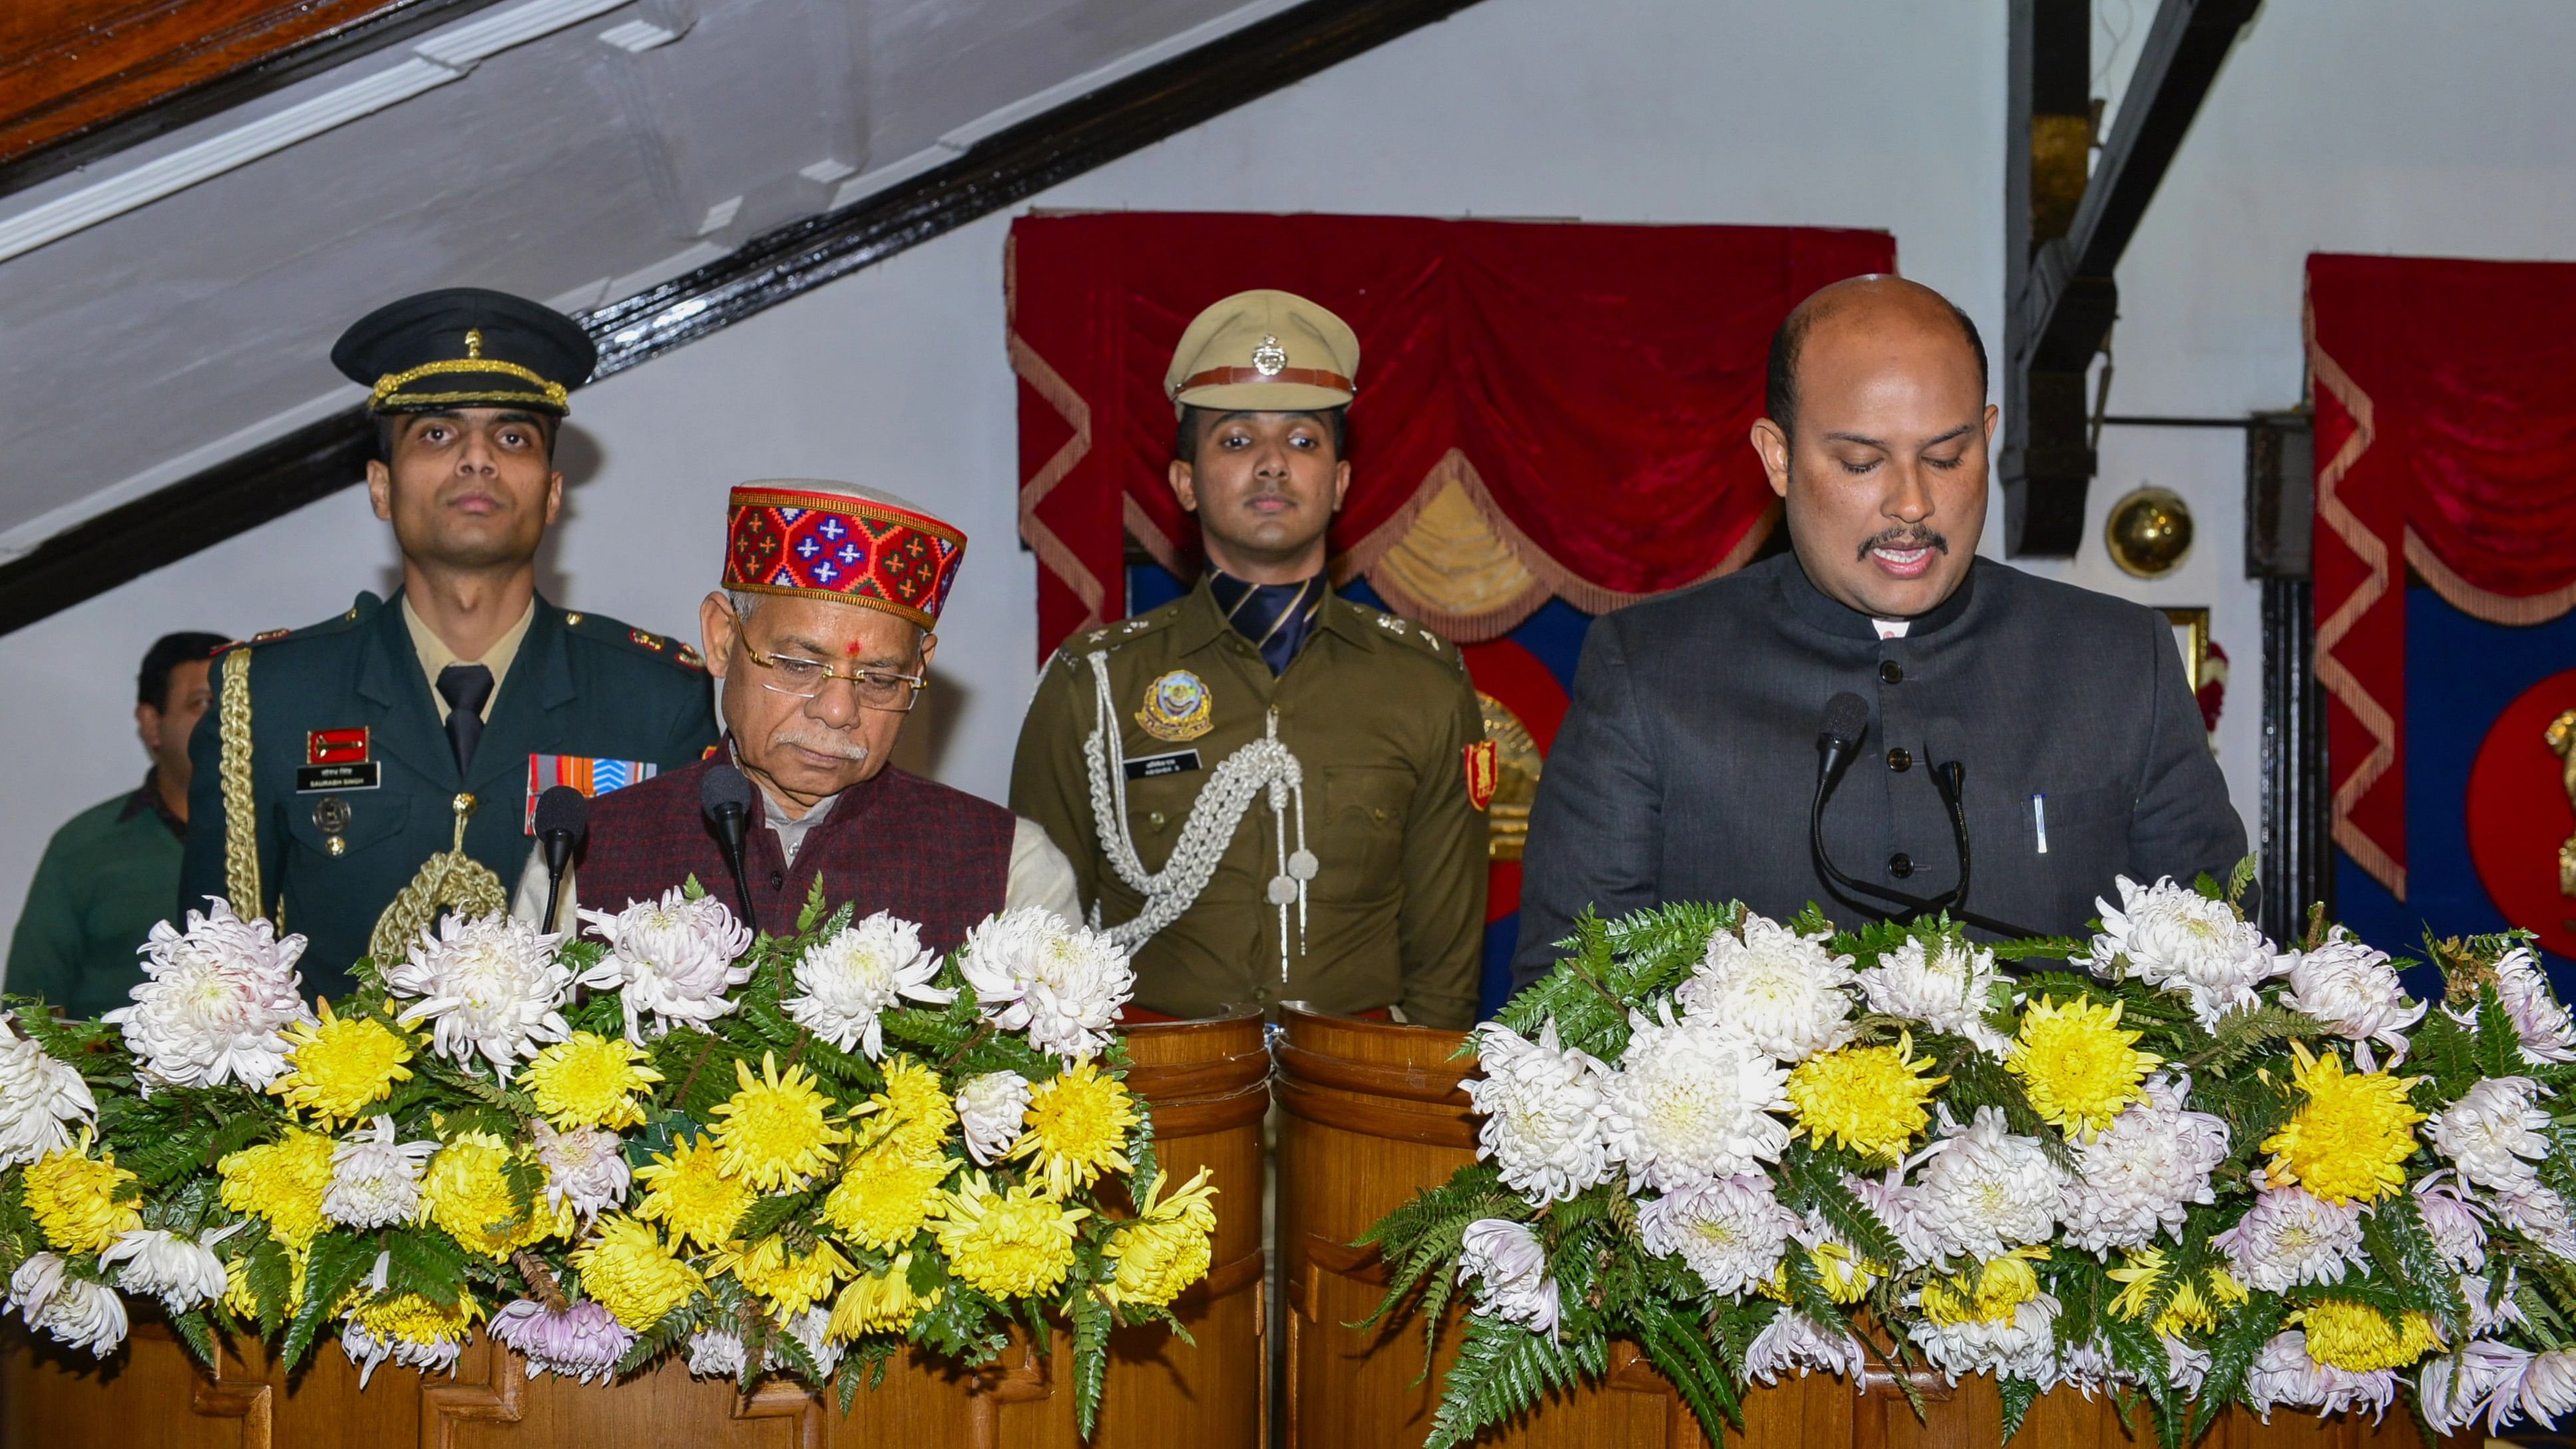 <div class="paragraphs"><p>Shimla: Himachal Pradesh Governor Shiv Pratap Shukla administers oath of office and secrecy to newly inducted cabinet minister Yadvinder Goma, at Raj Bhawan in Shimla.</p></div>